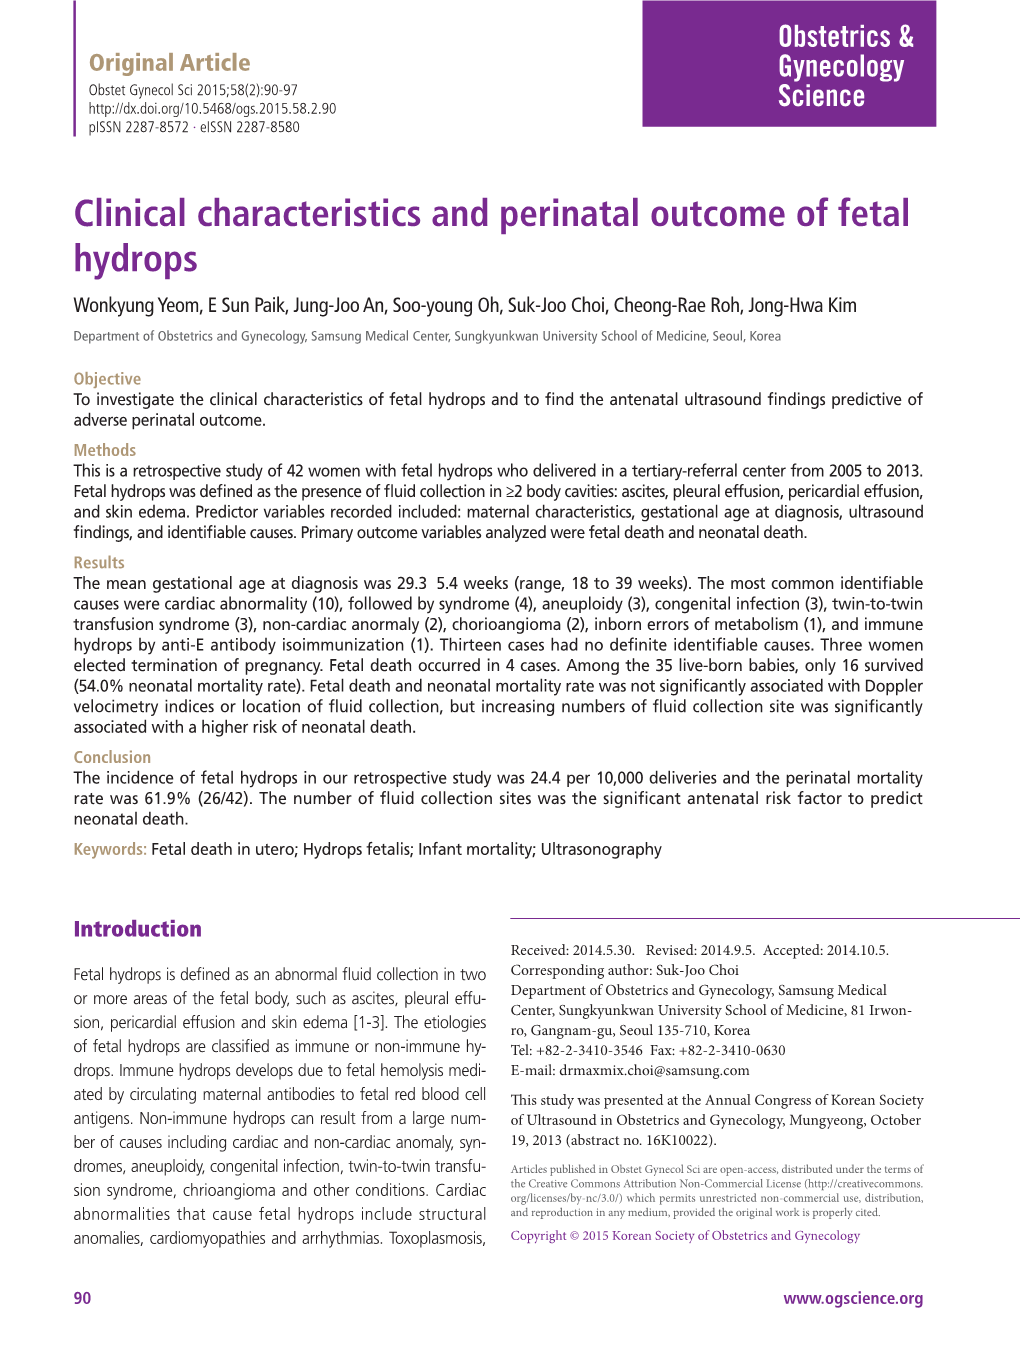 Clinical Characteristics and Perinatal Outcome of Fetal Hydrops